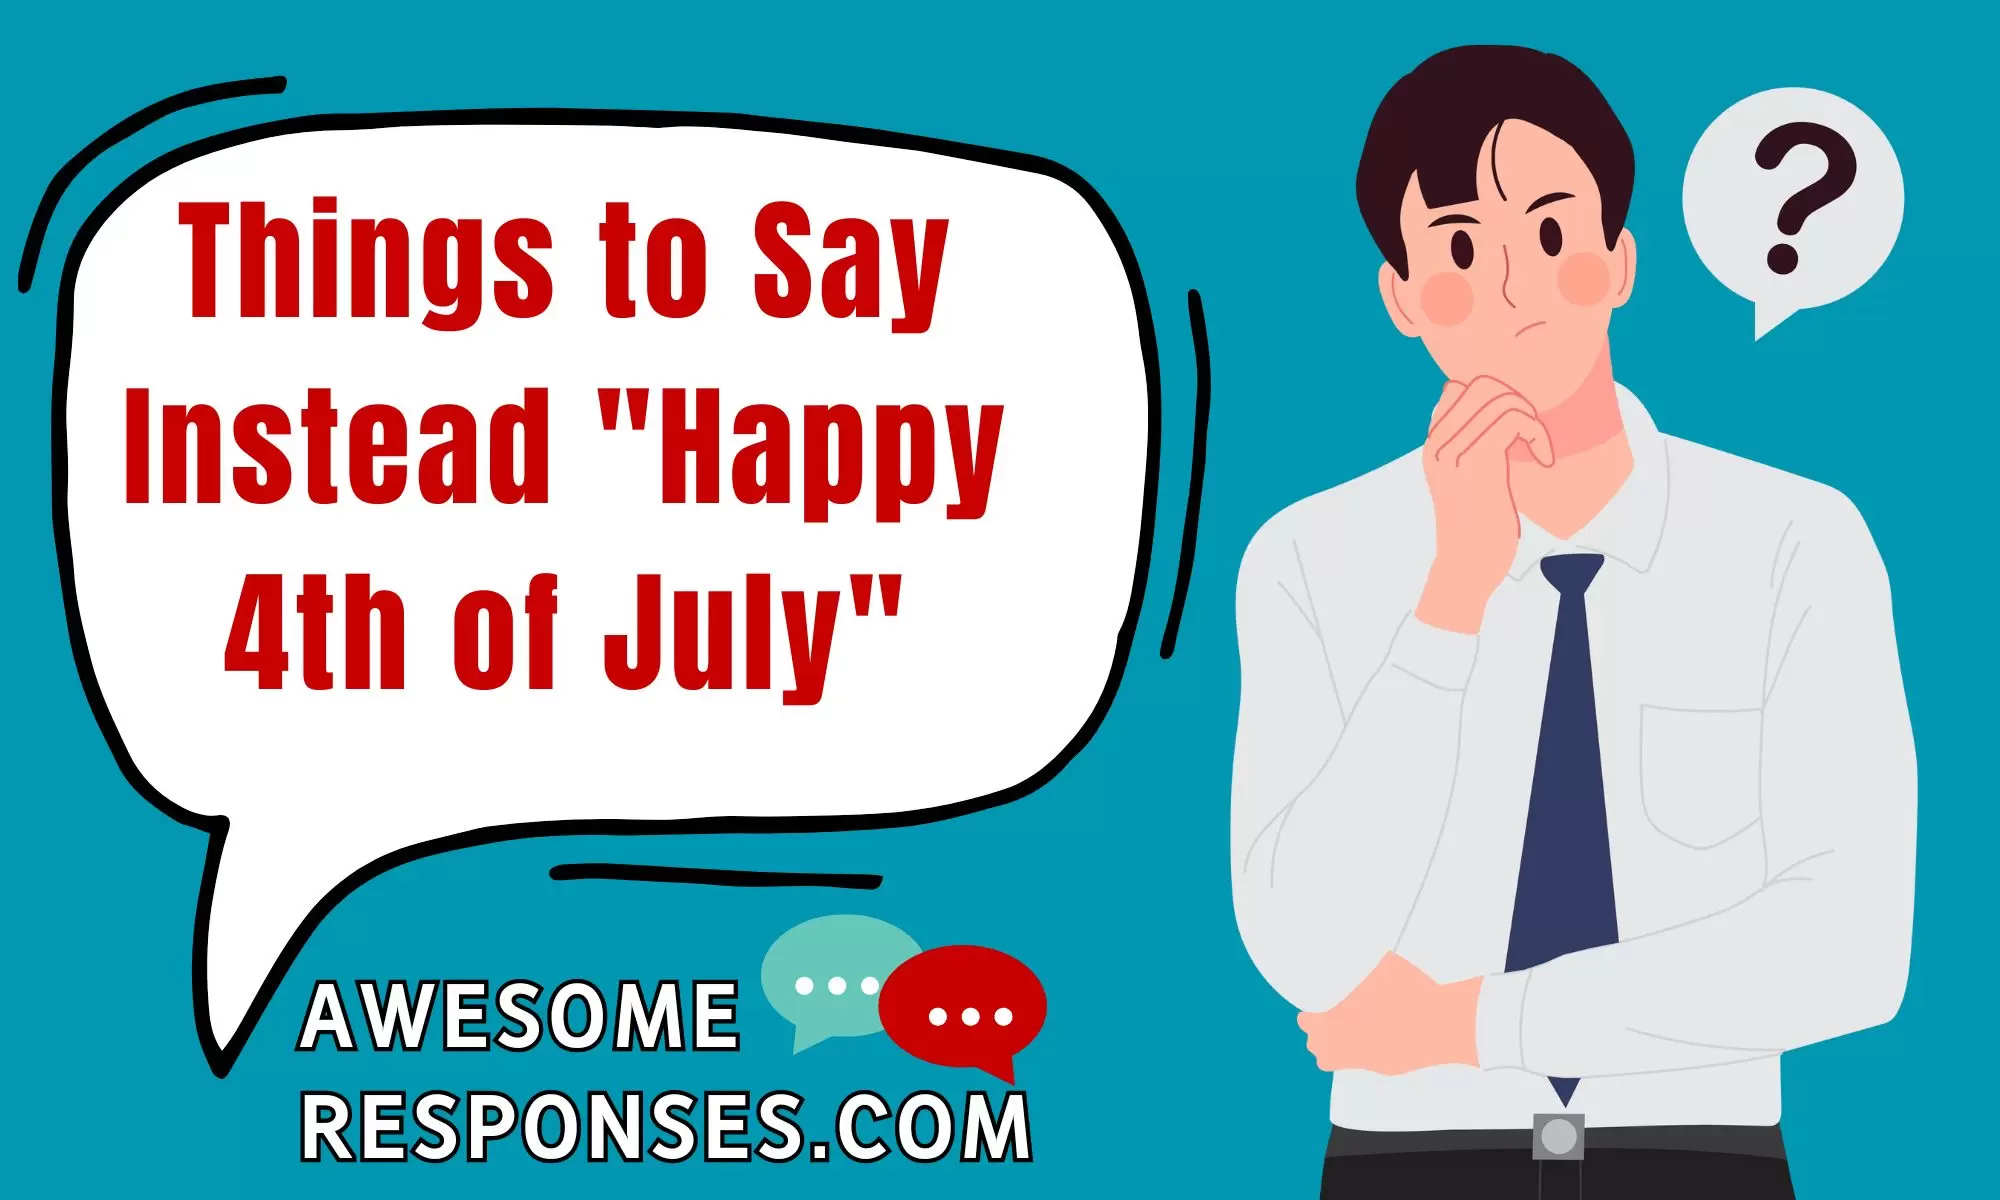 Things to Say Instead Happy 4th of July